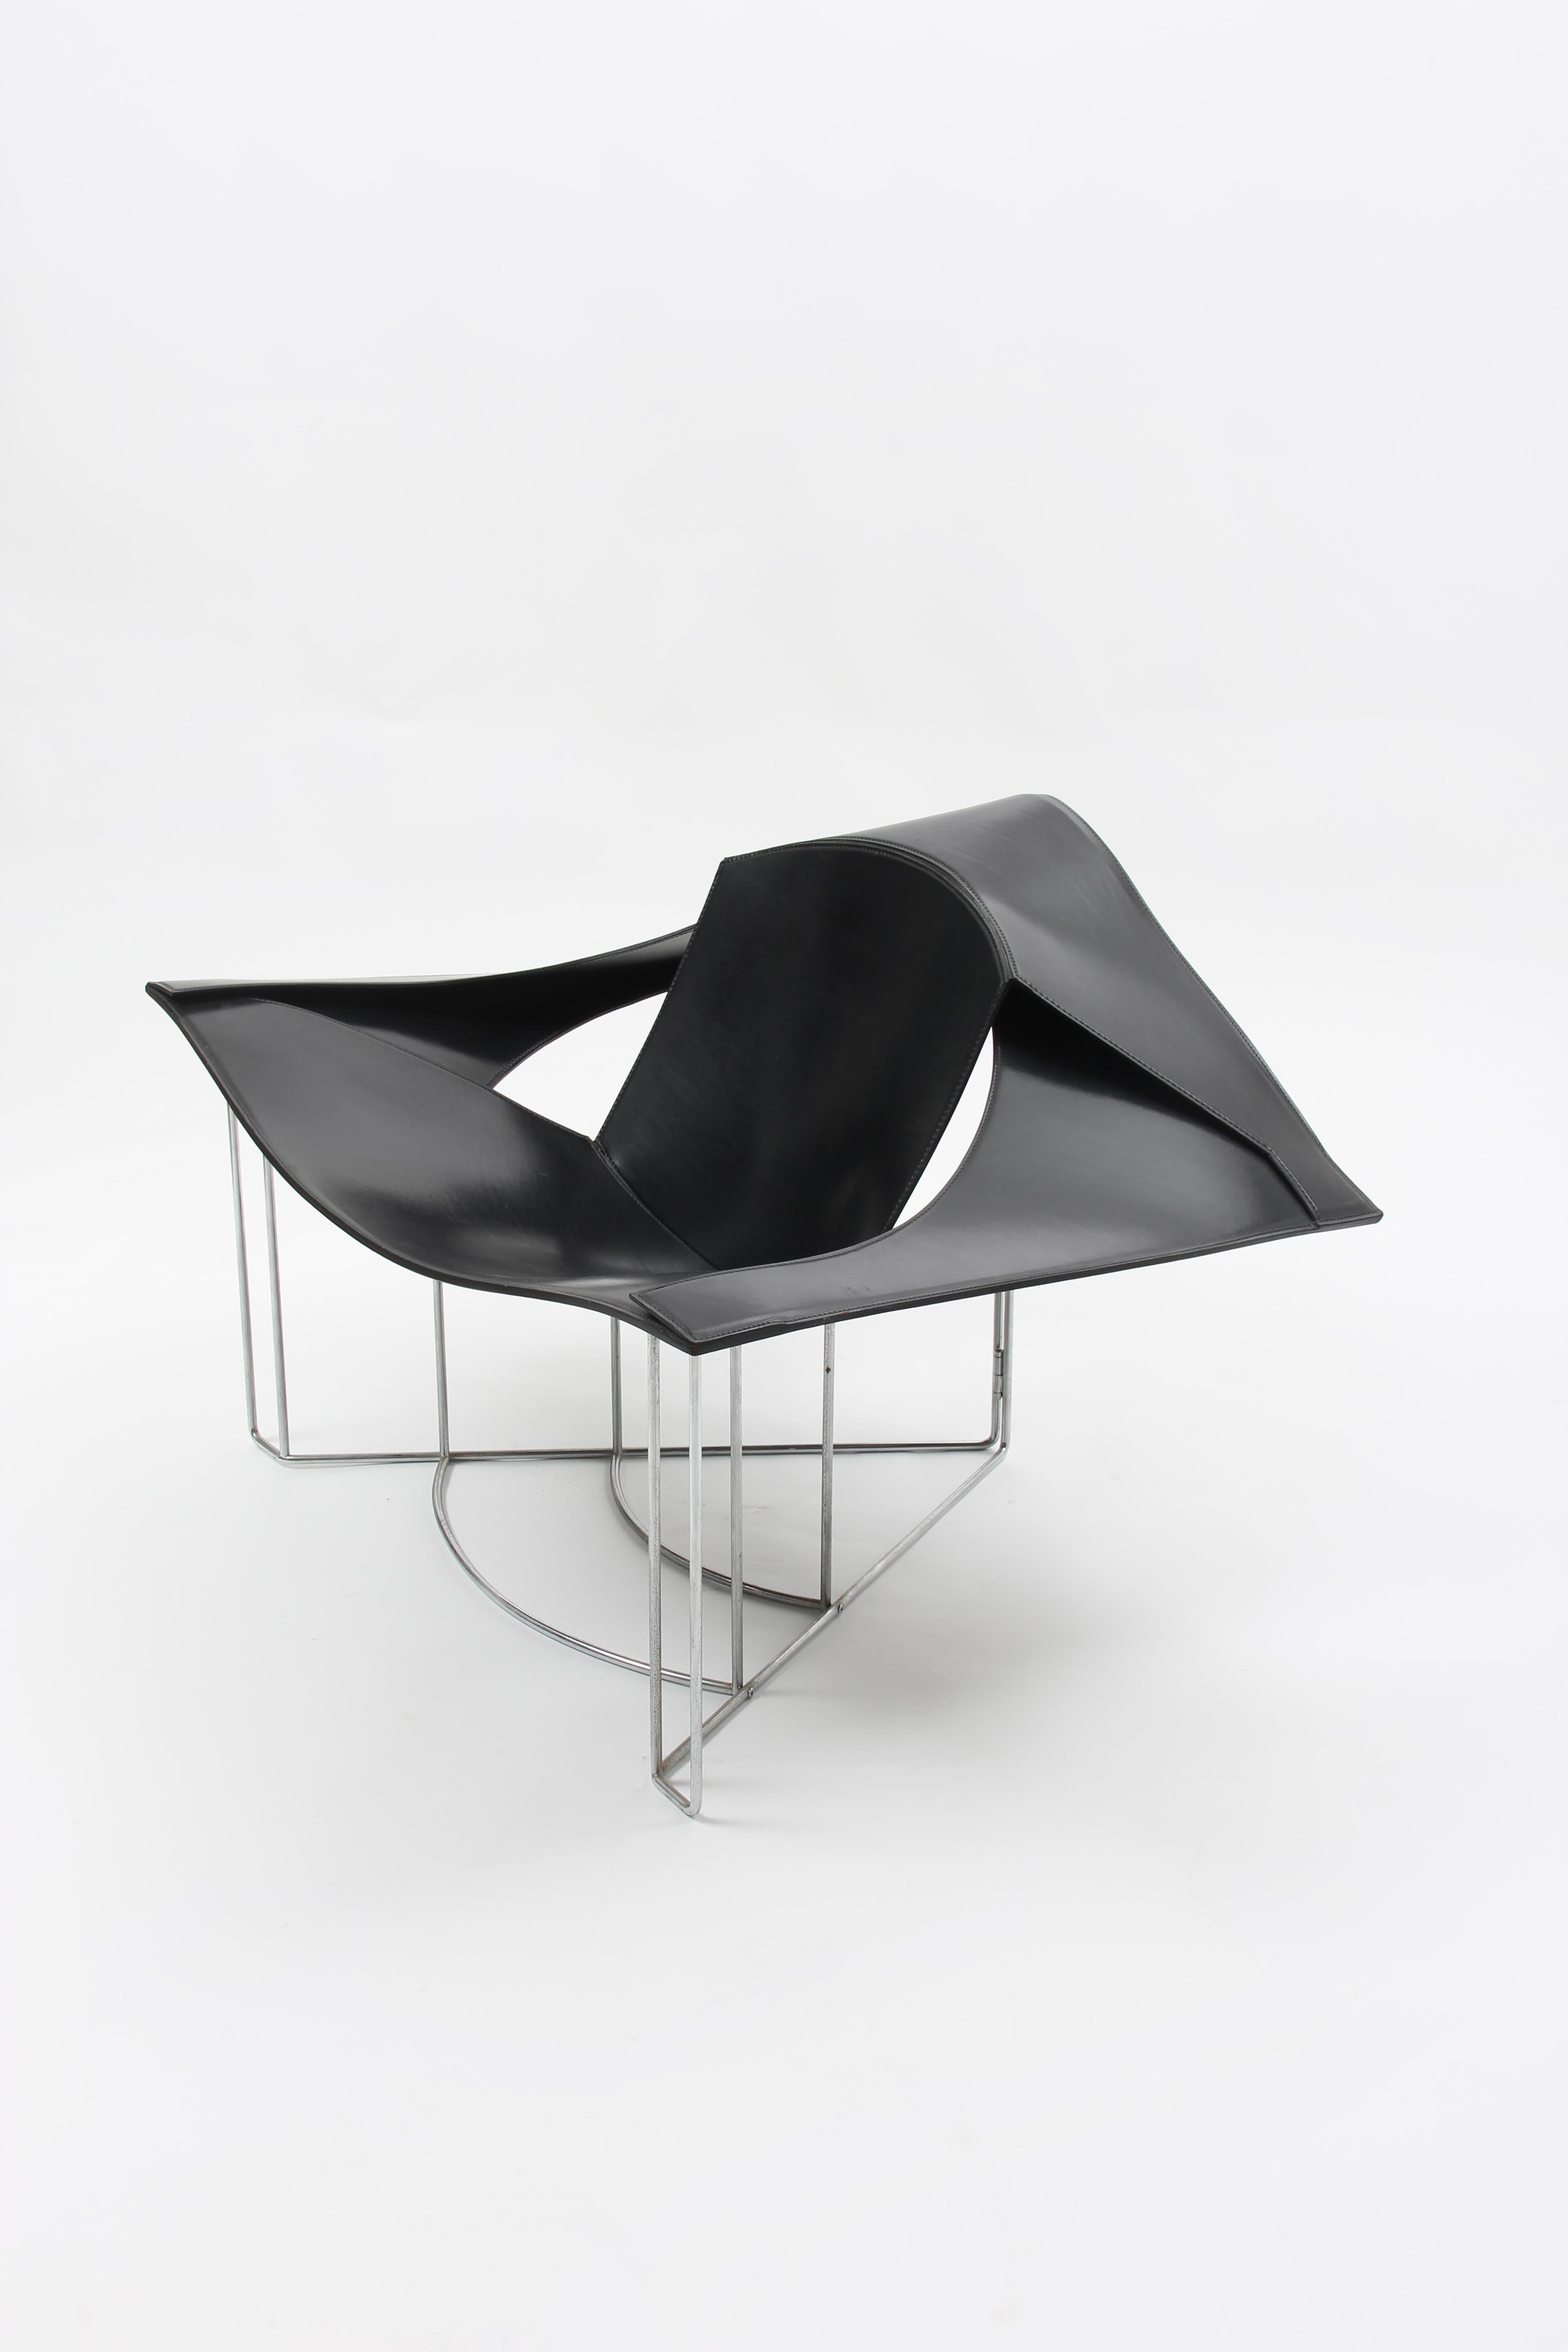 Late 20th Century Lounge Chair by Jacques Harold Pollard for Matteo Grassi, 1990s For Sale